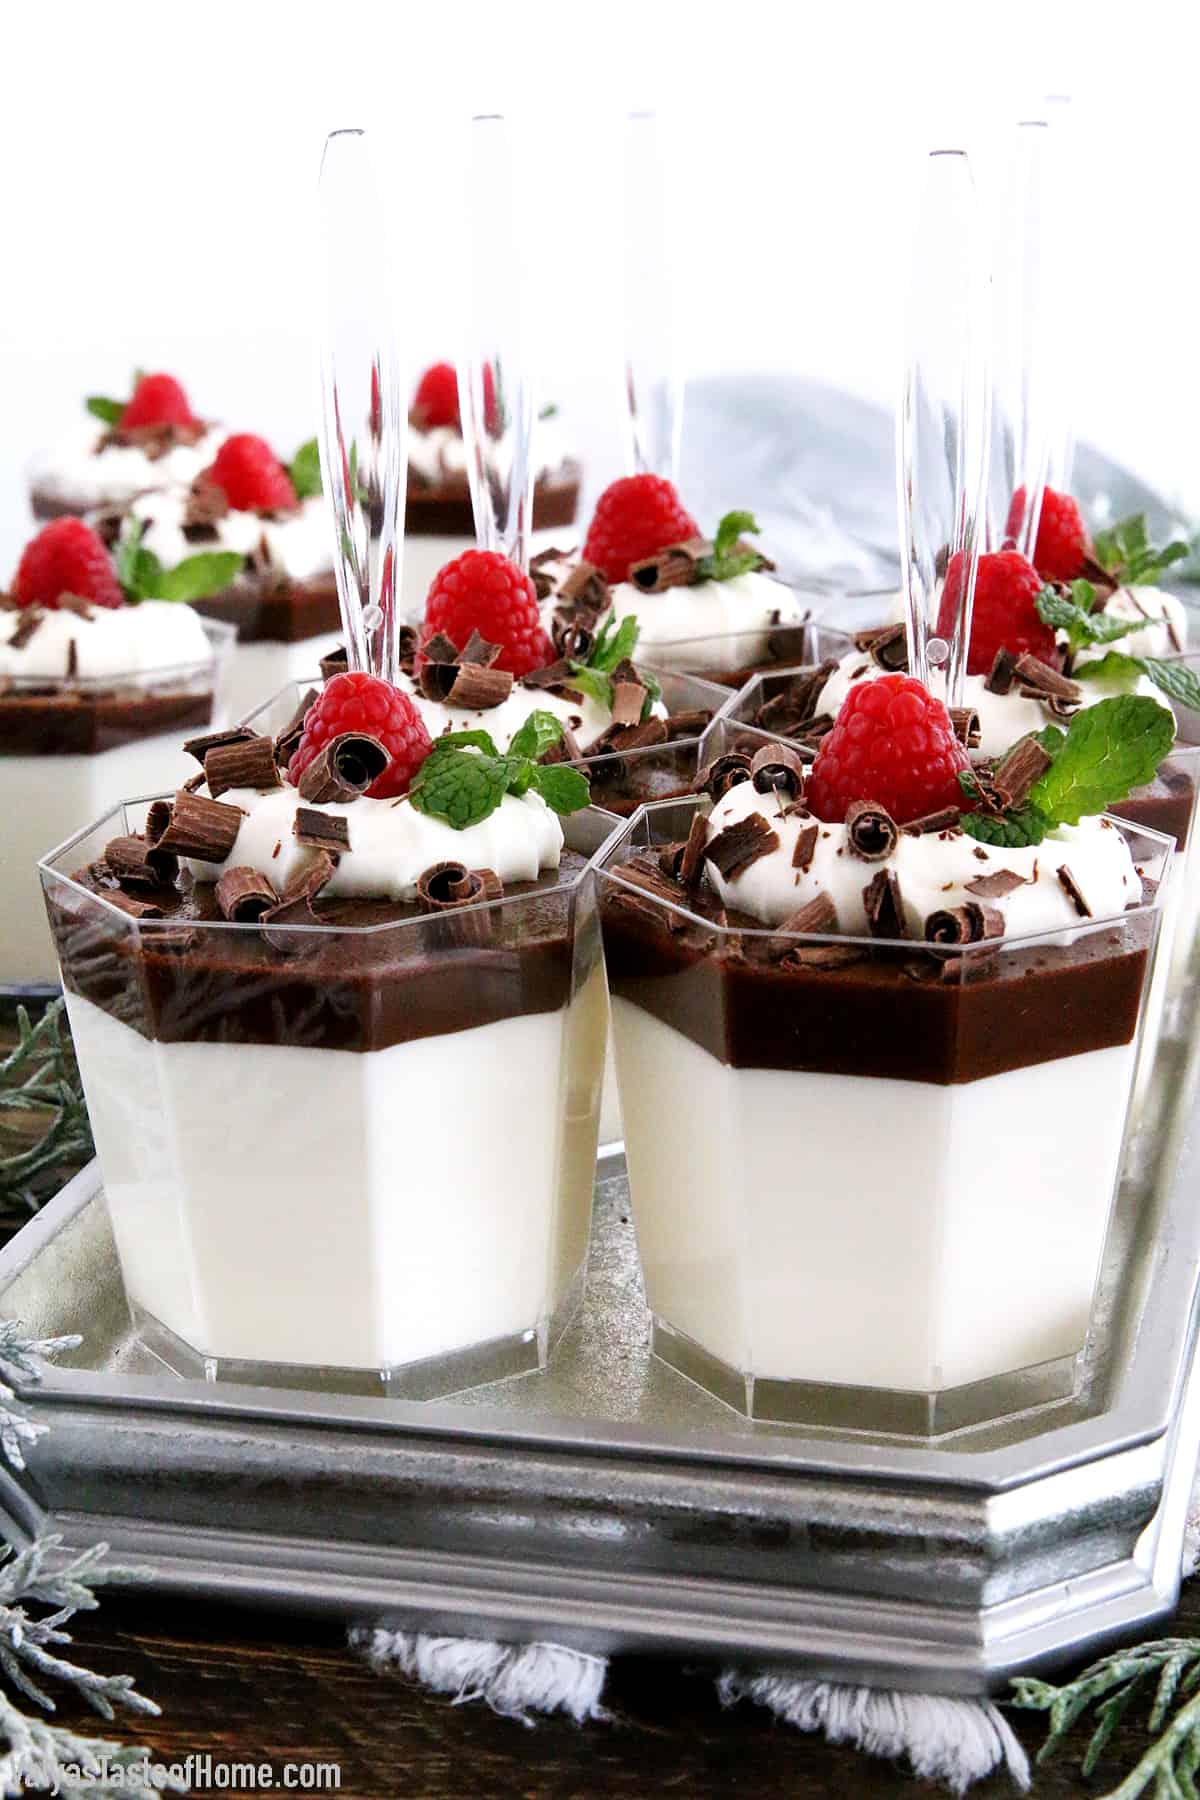 An amazingly delicious creamy mousse-like base, covered with a thin layer of cacao-jelly, topped with smooth whipping cream, and dressed with berries and shaved dark chocolate.